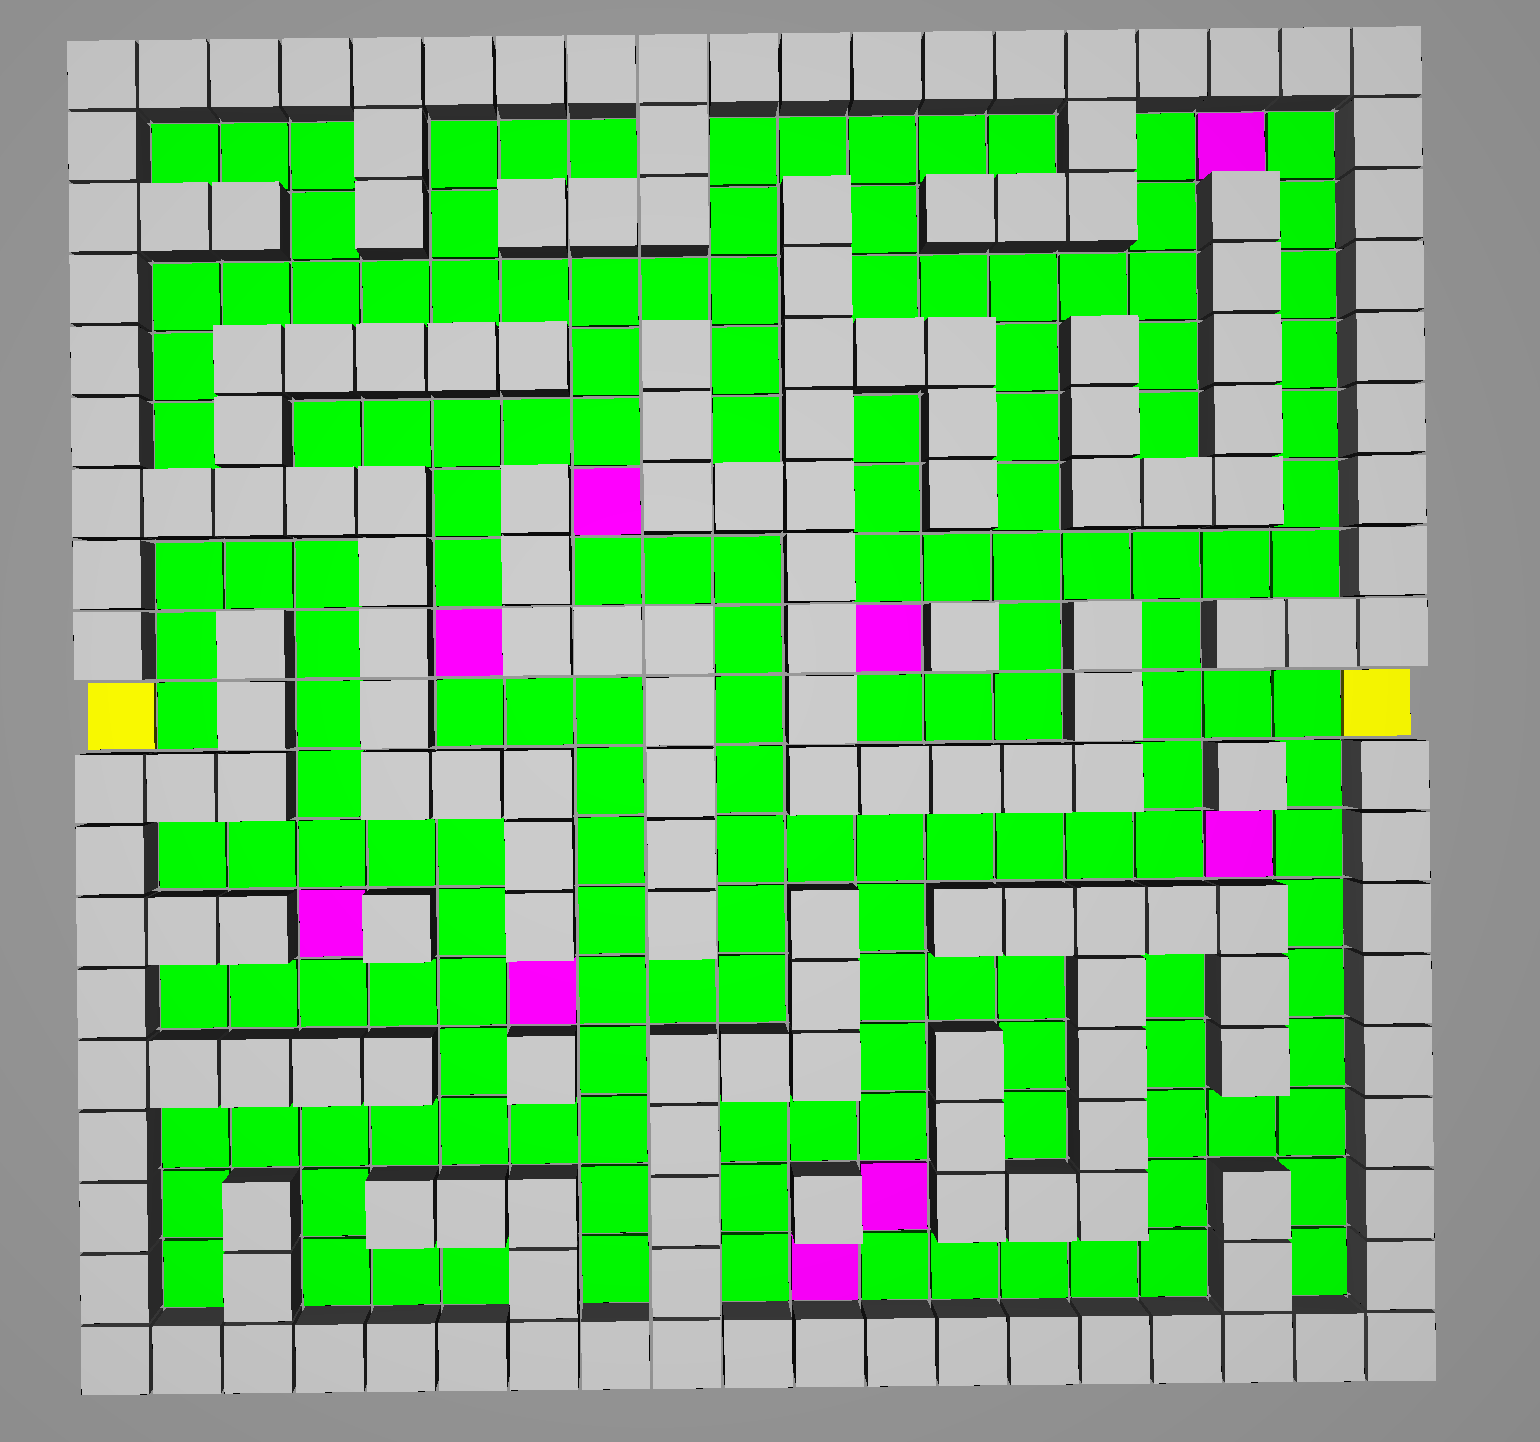 Maze with holes